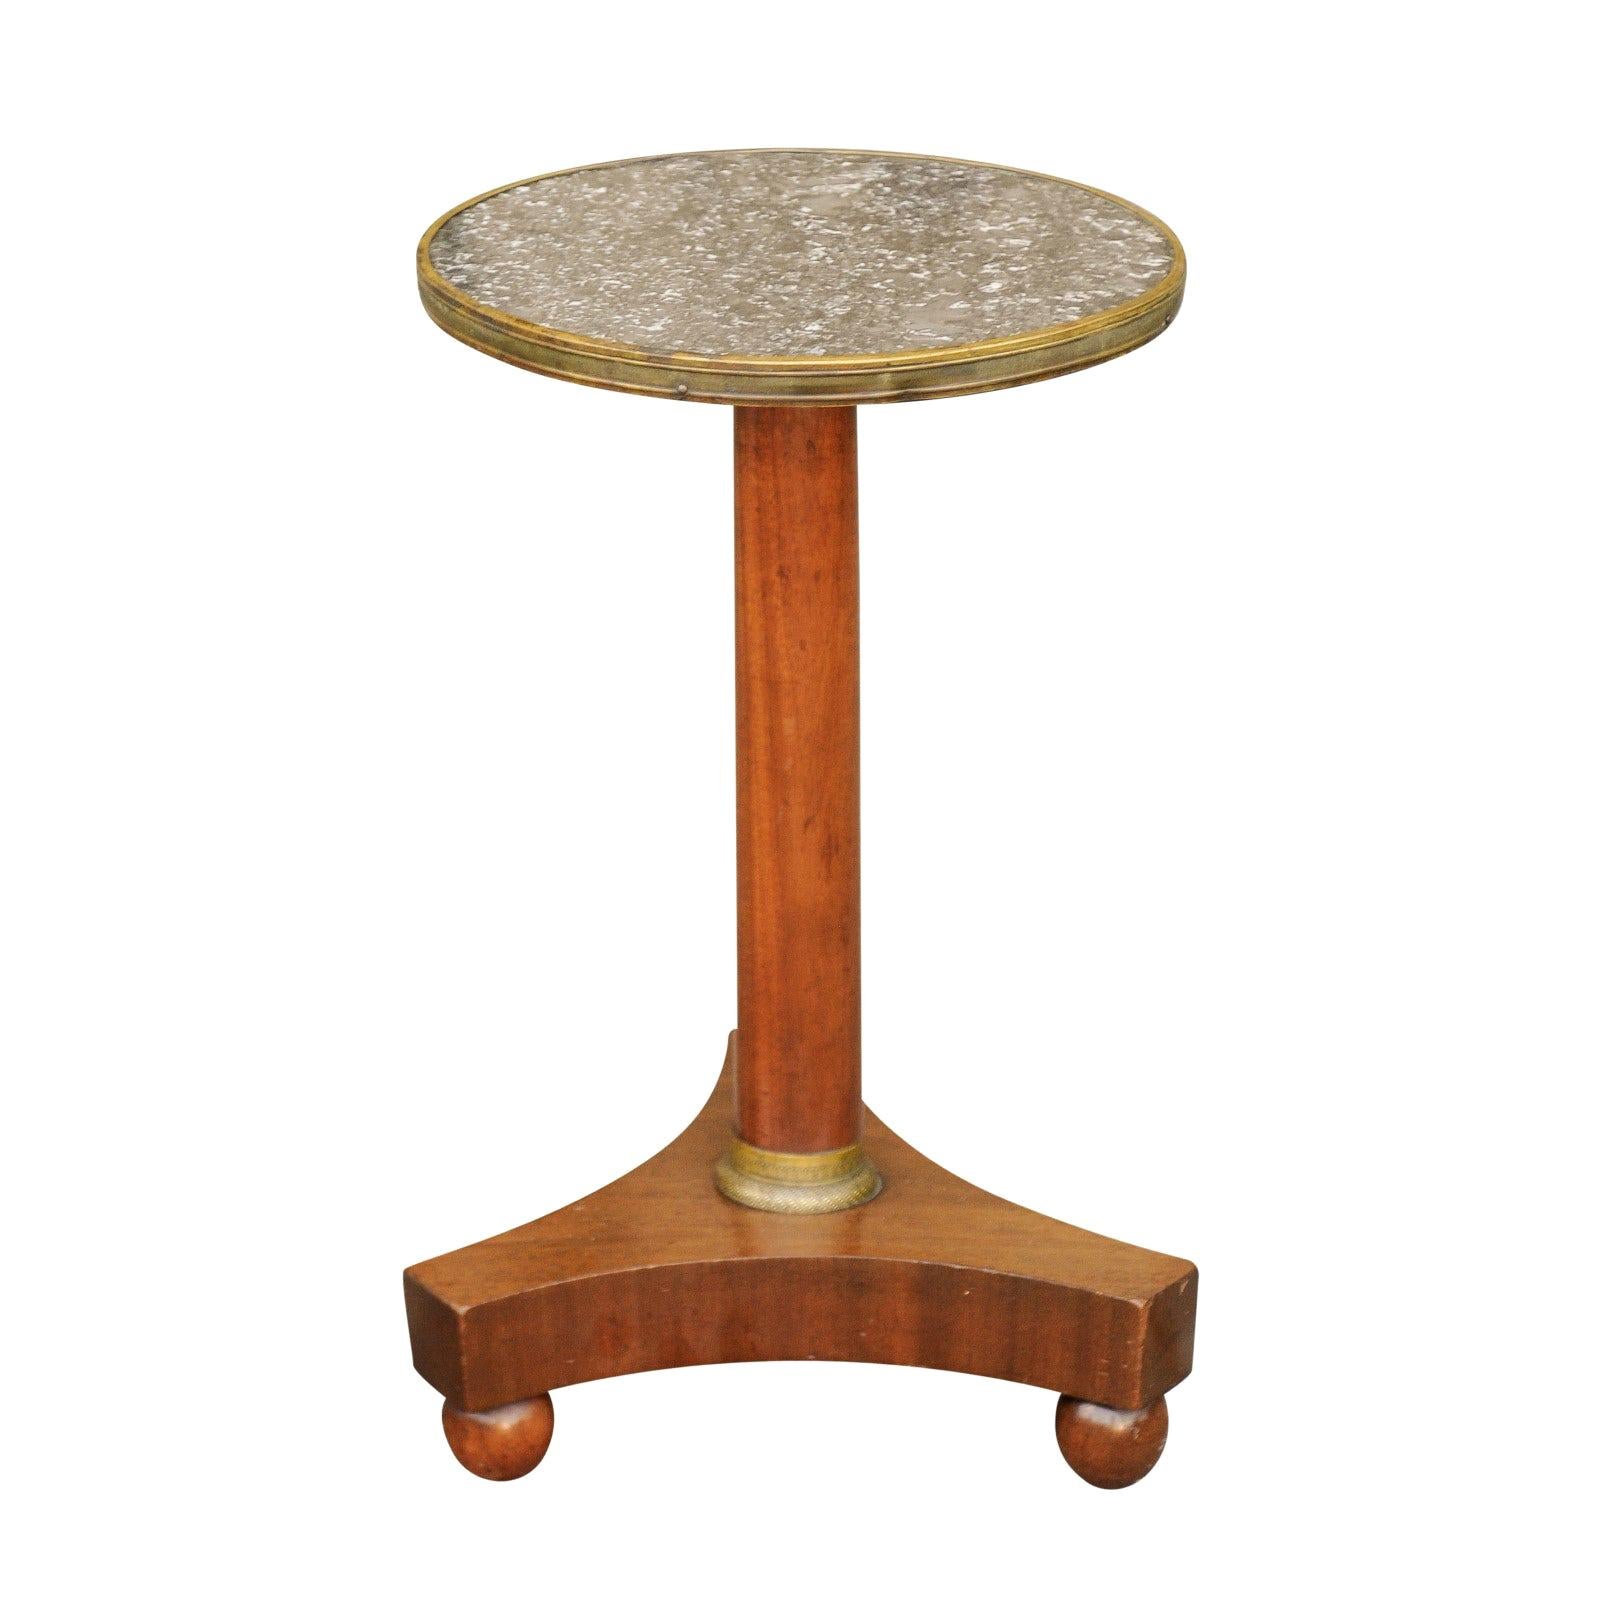 French Empire Style 1870s Guéridon Table with Grey Marble Top and Gilt Accents